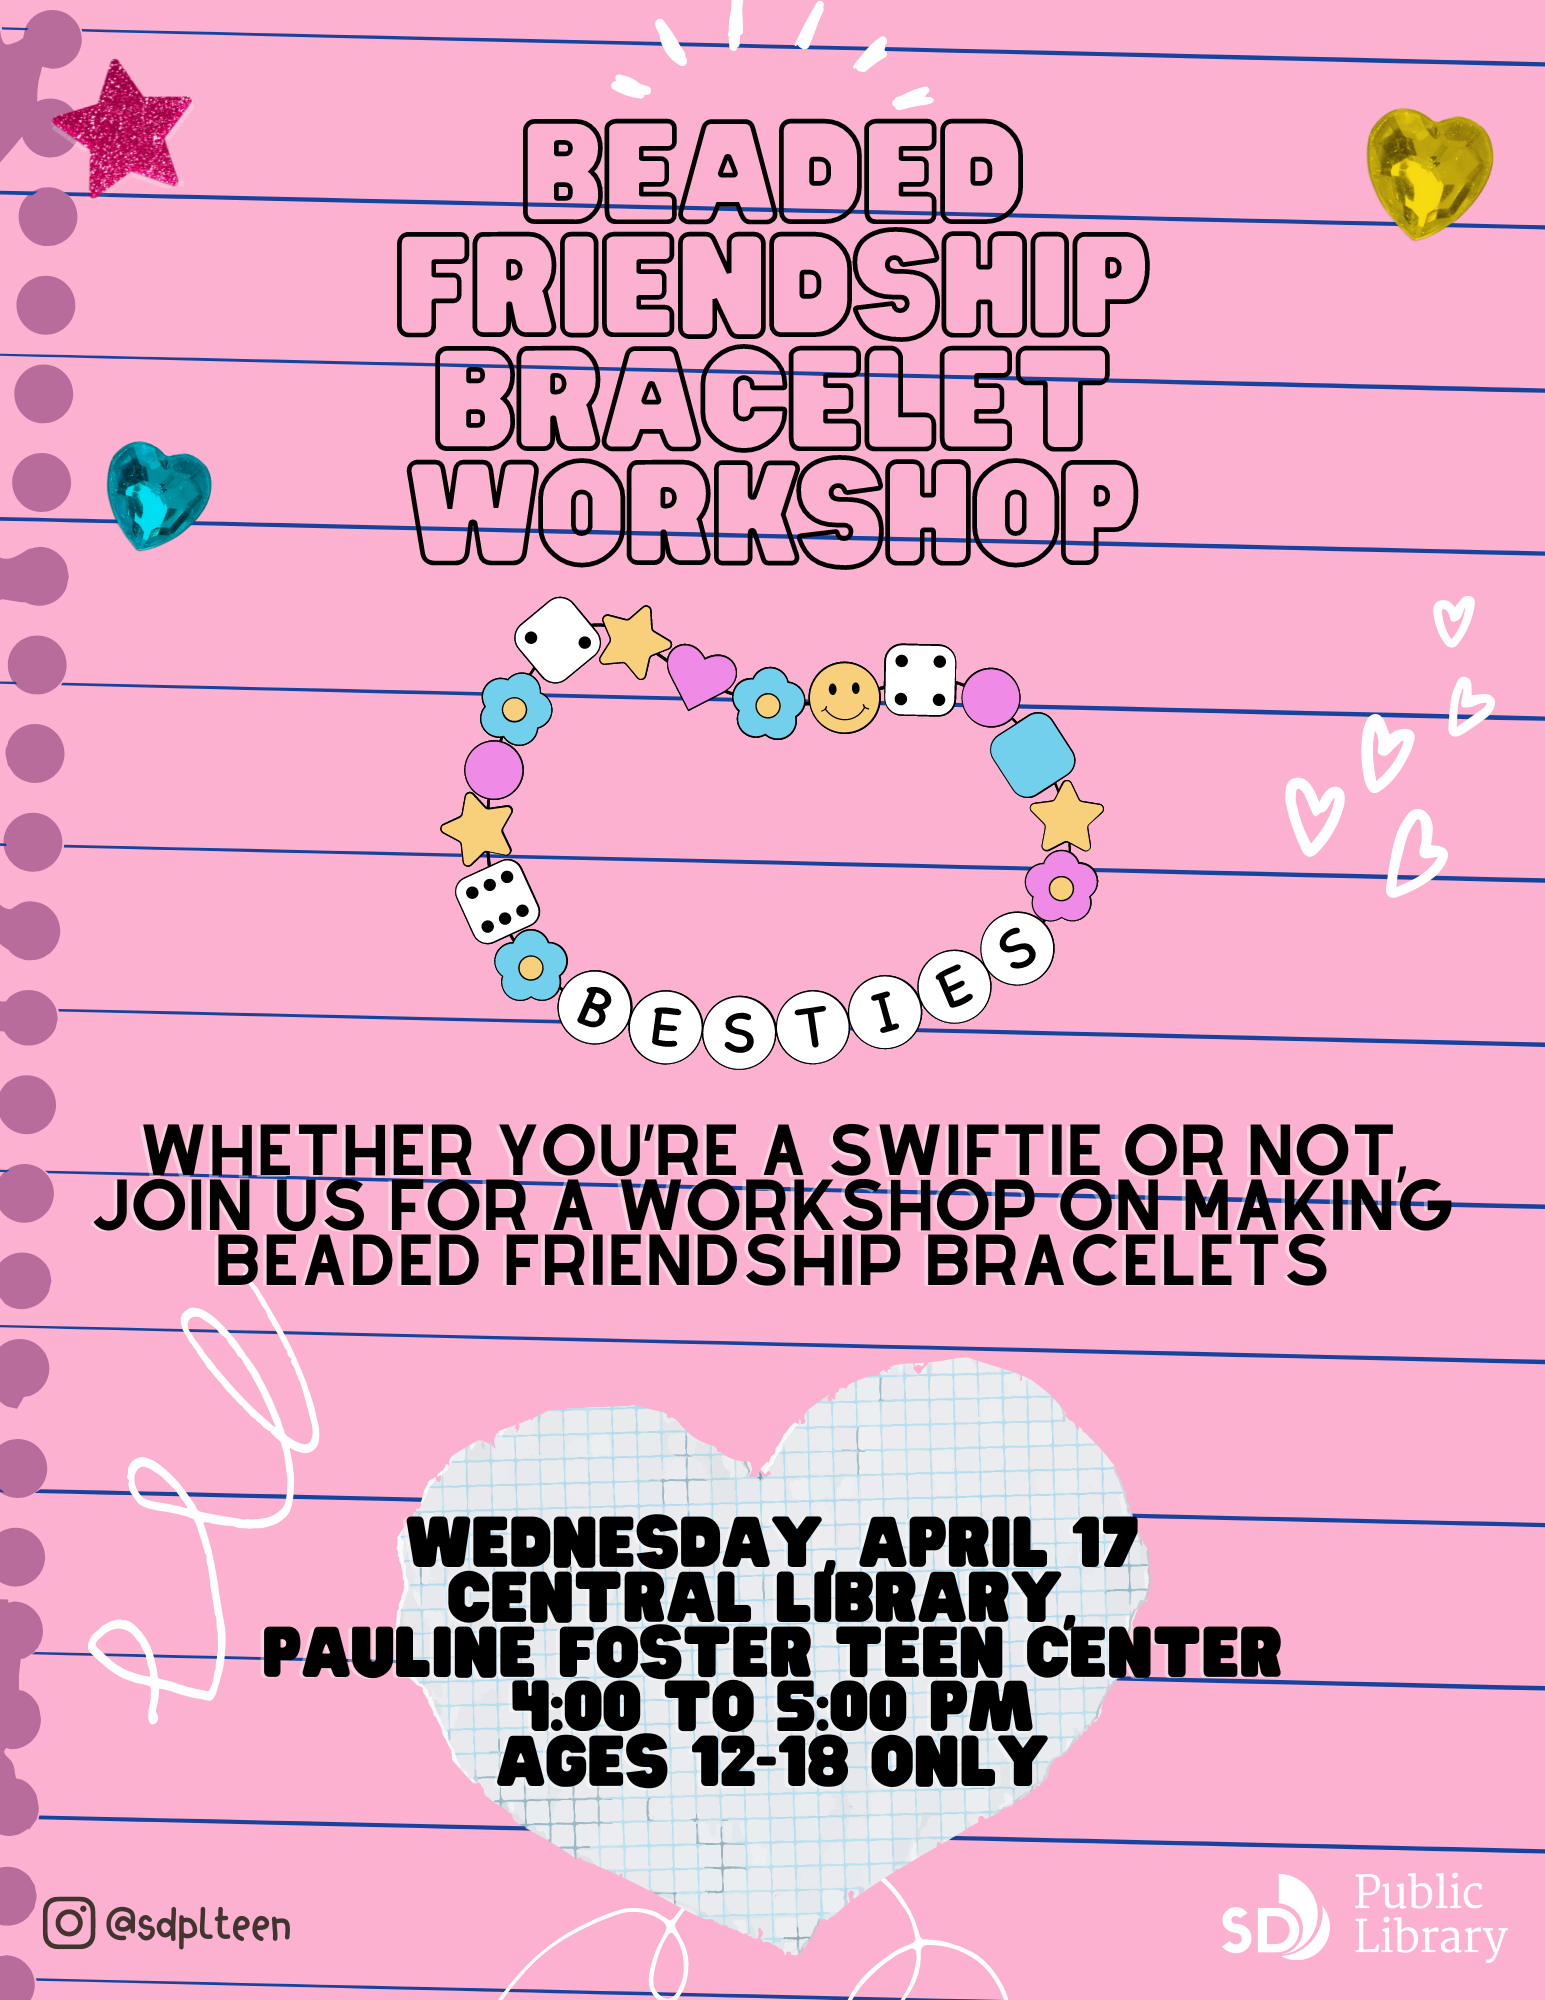 Beaded Friendship bracelet workshop. WHETHER YOU’RE A SWIFTIE OR NOT, JOIN US FOR A WORKSHOP ON MAKING BEADED FRIENDSHIP BRACELETS. WEDNESDAY, APRIL 17 CENTRAL LIBRARY, PAULINE FOSTER TEEN CENTER 4:00 TO 5:00 PM AGES 12-18 ONLY.